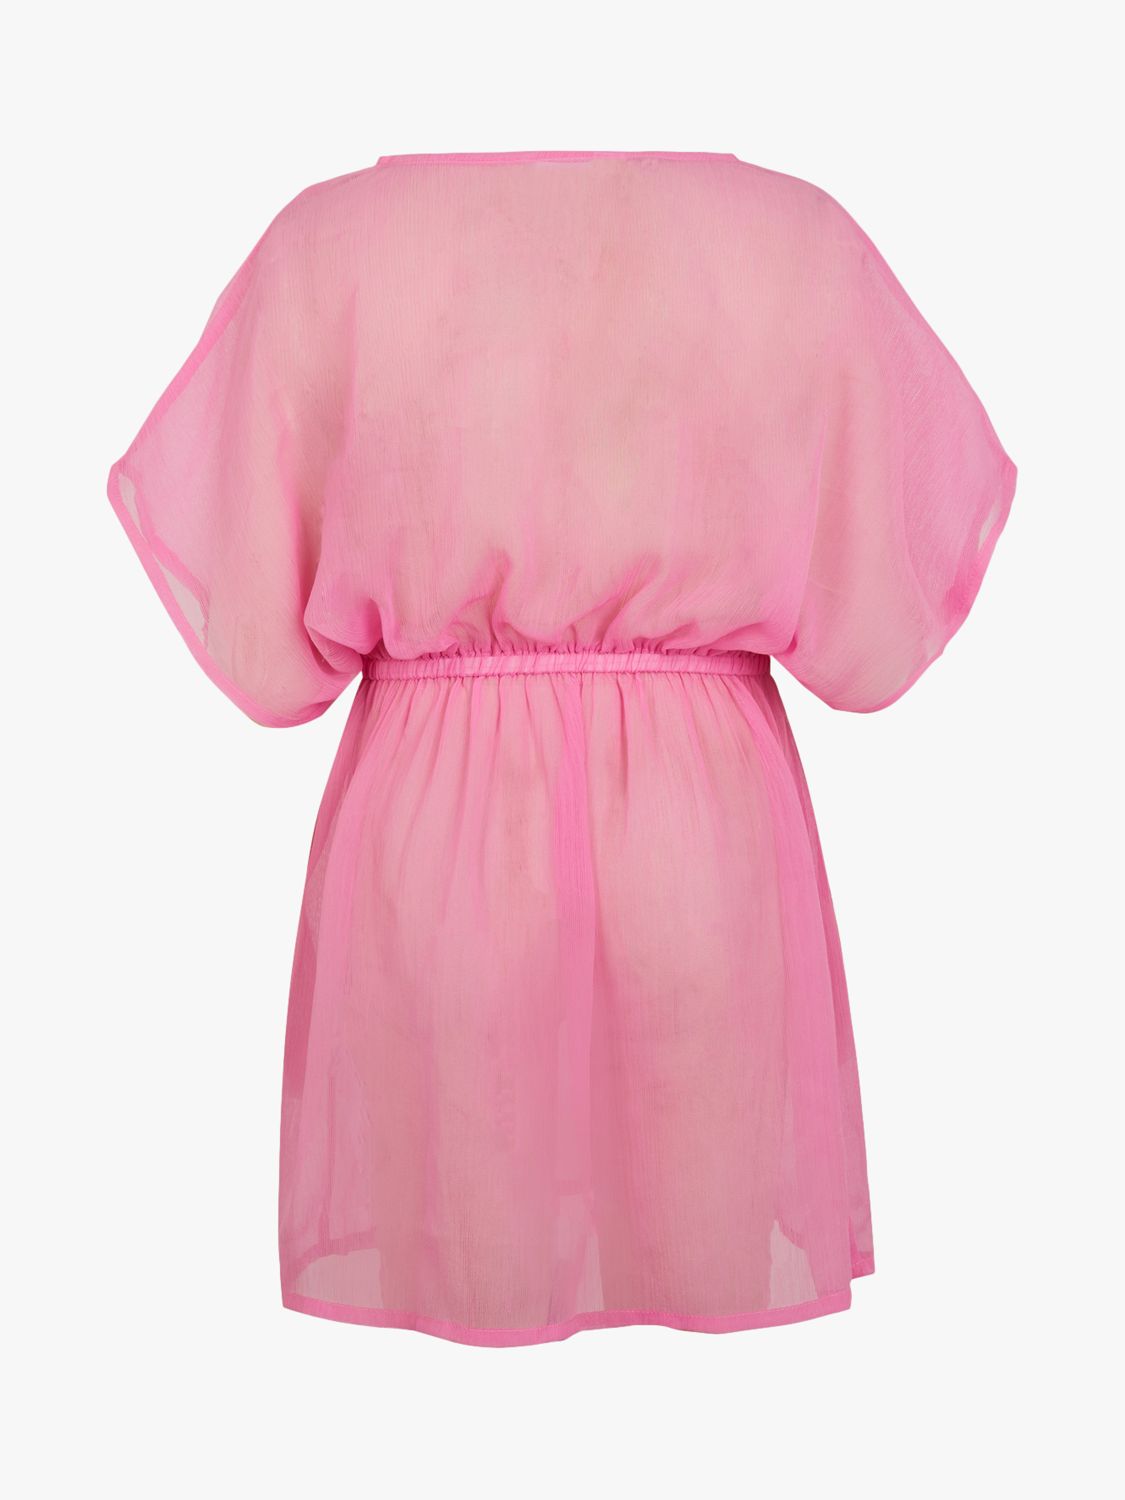 Accessorize Kids' Embroidered Kaftan, Pink, 3-4 years